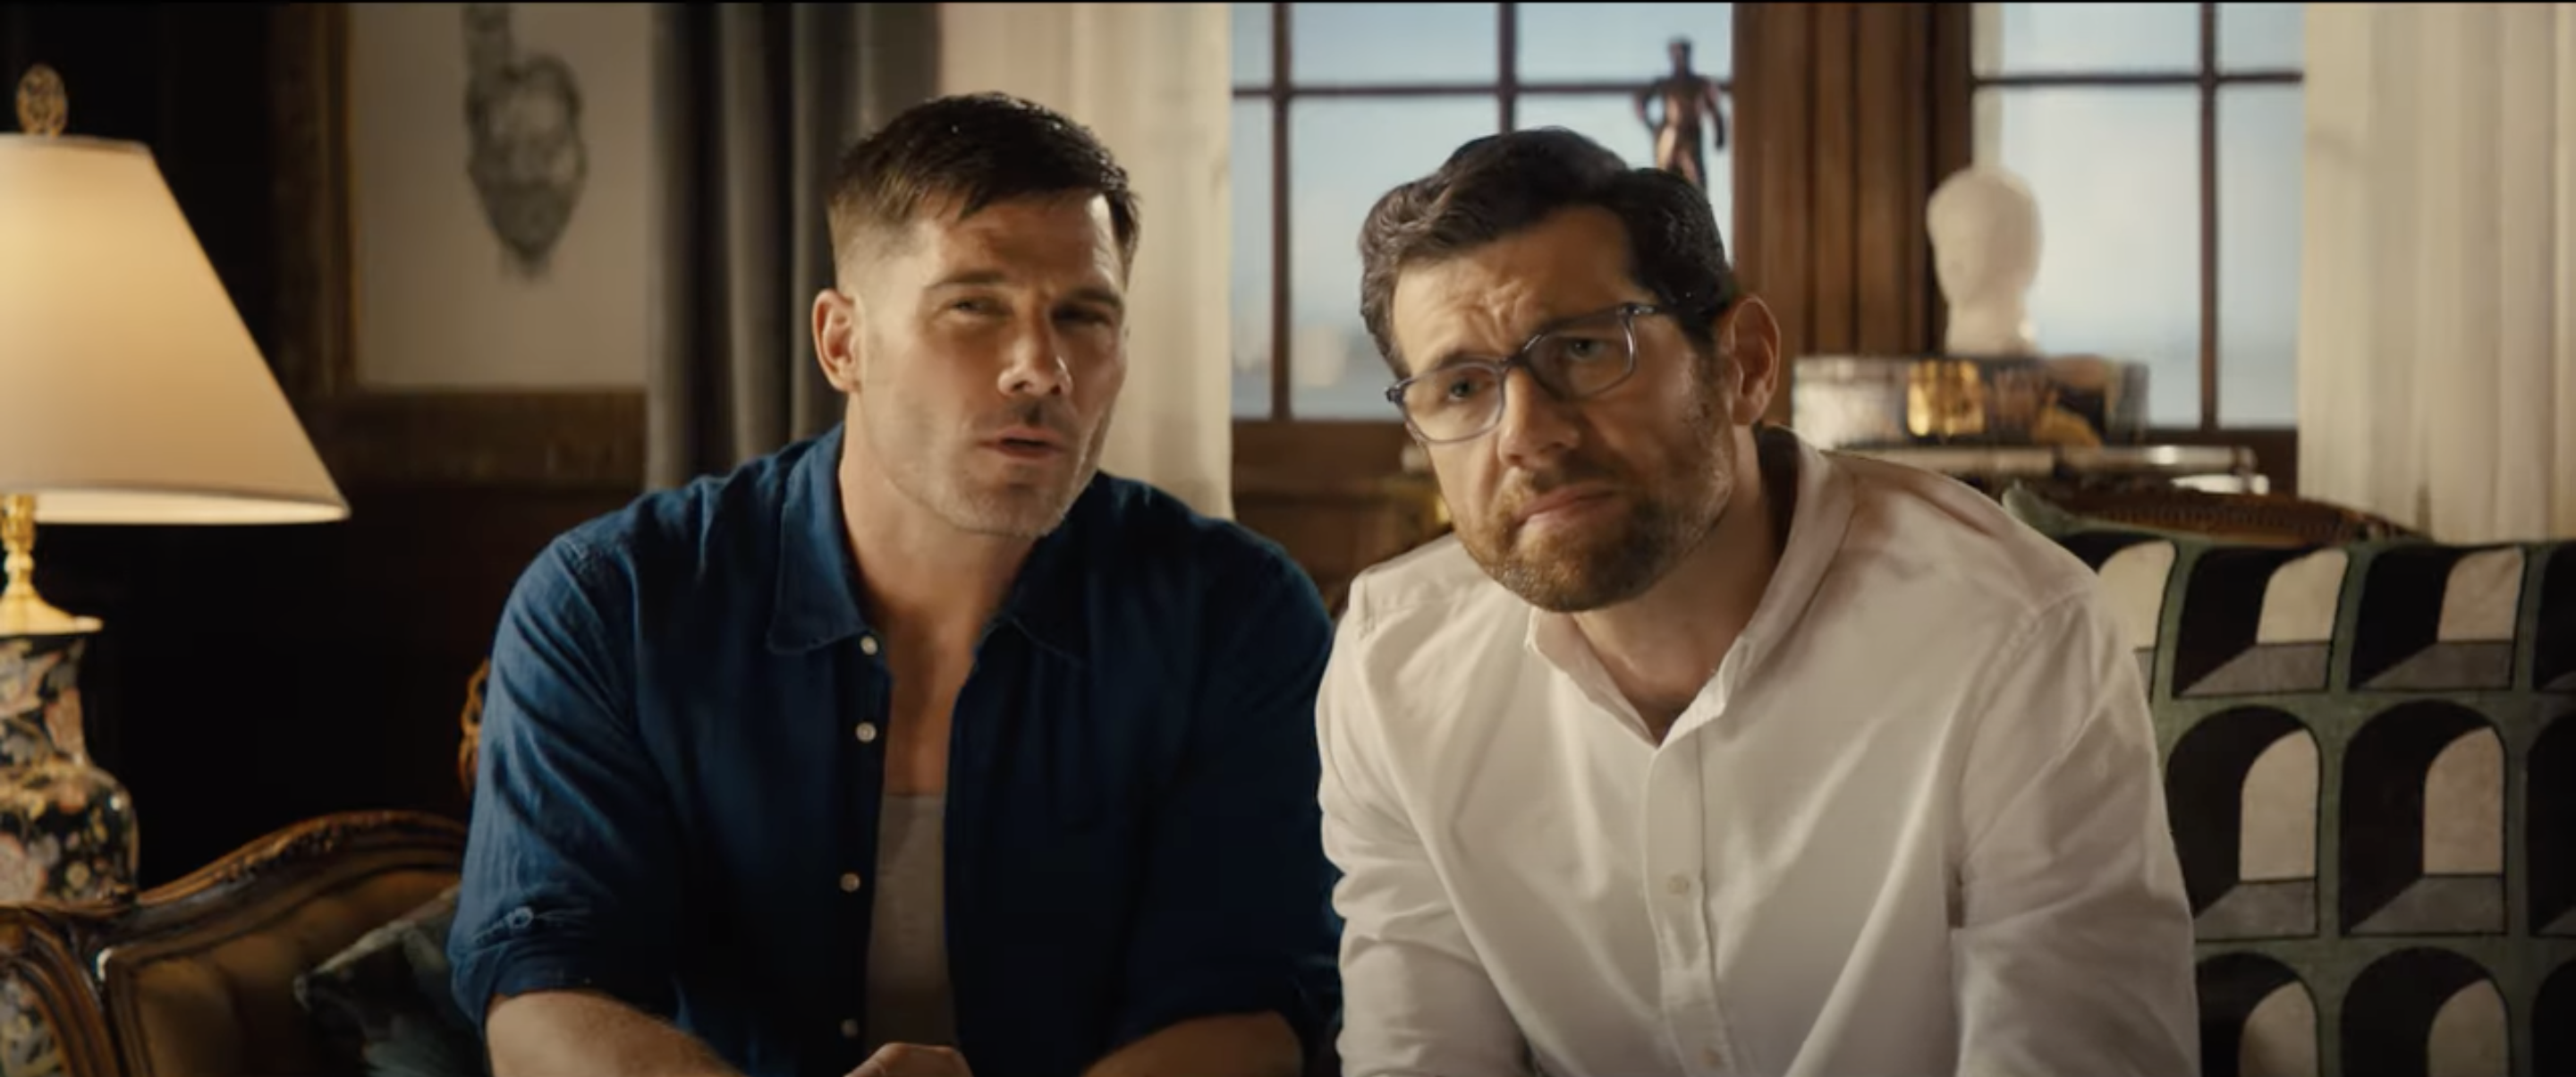 best gay comedy movies 2022